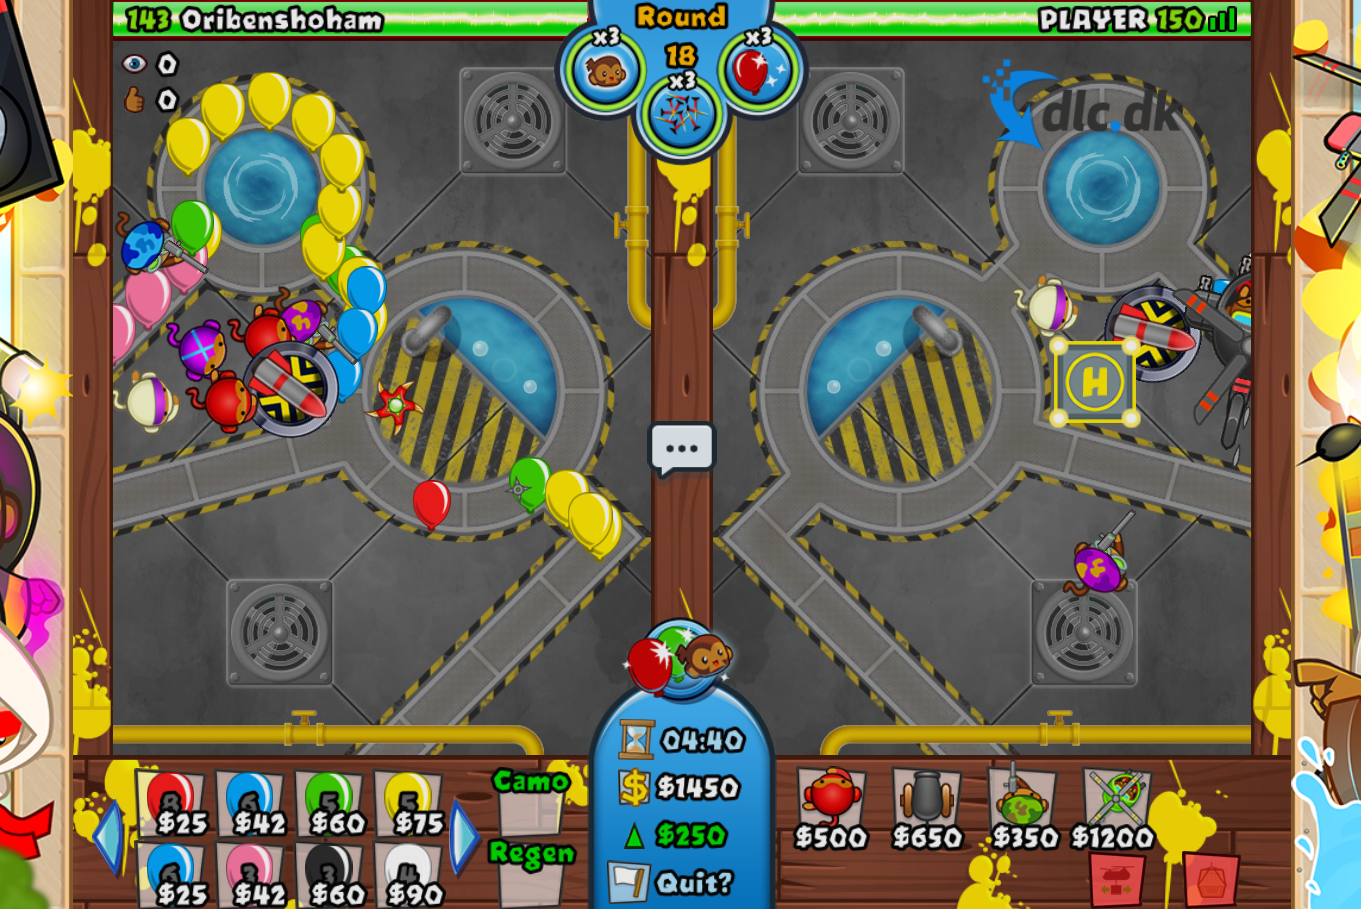 free Bloons TD Battle for iphone instal